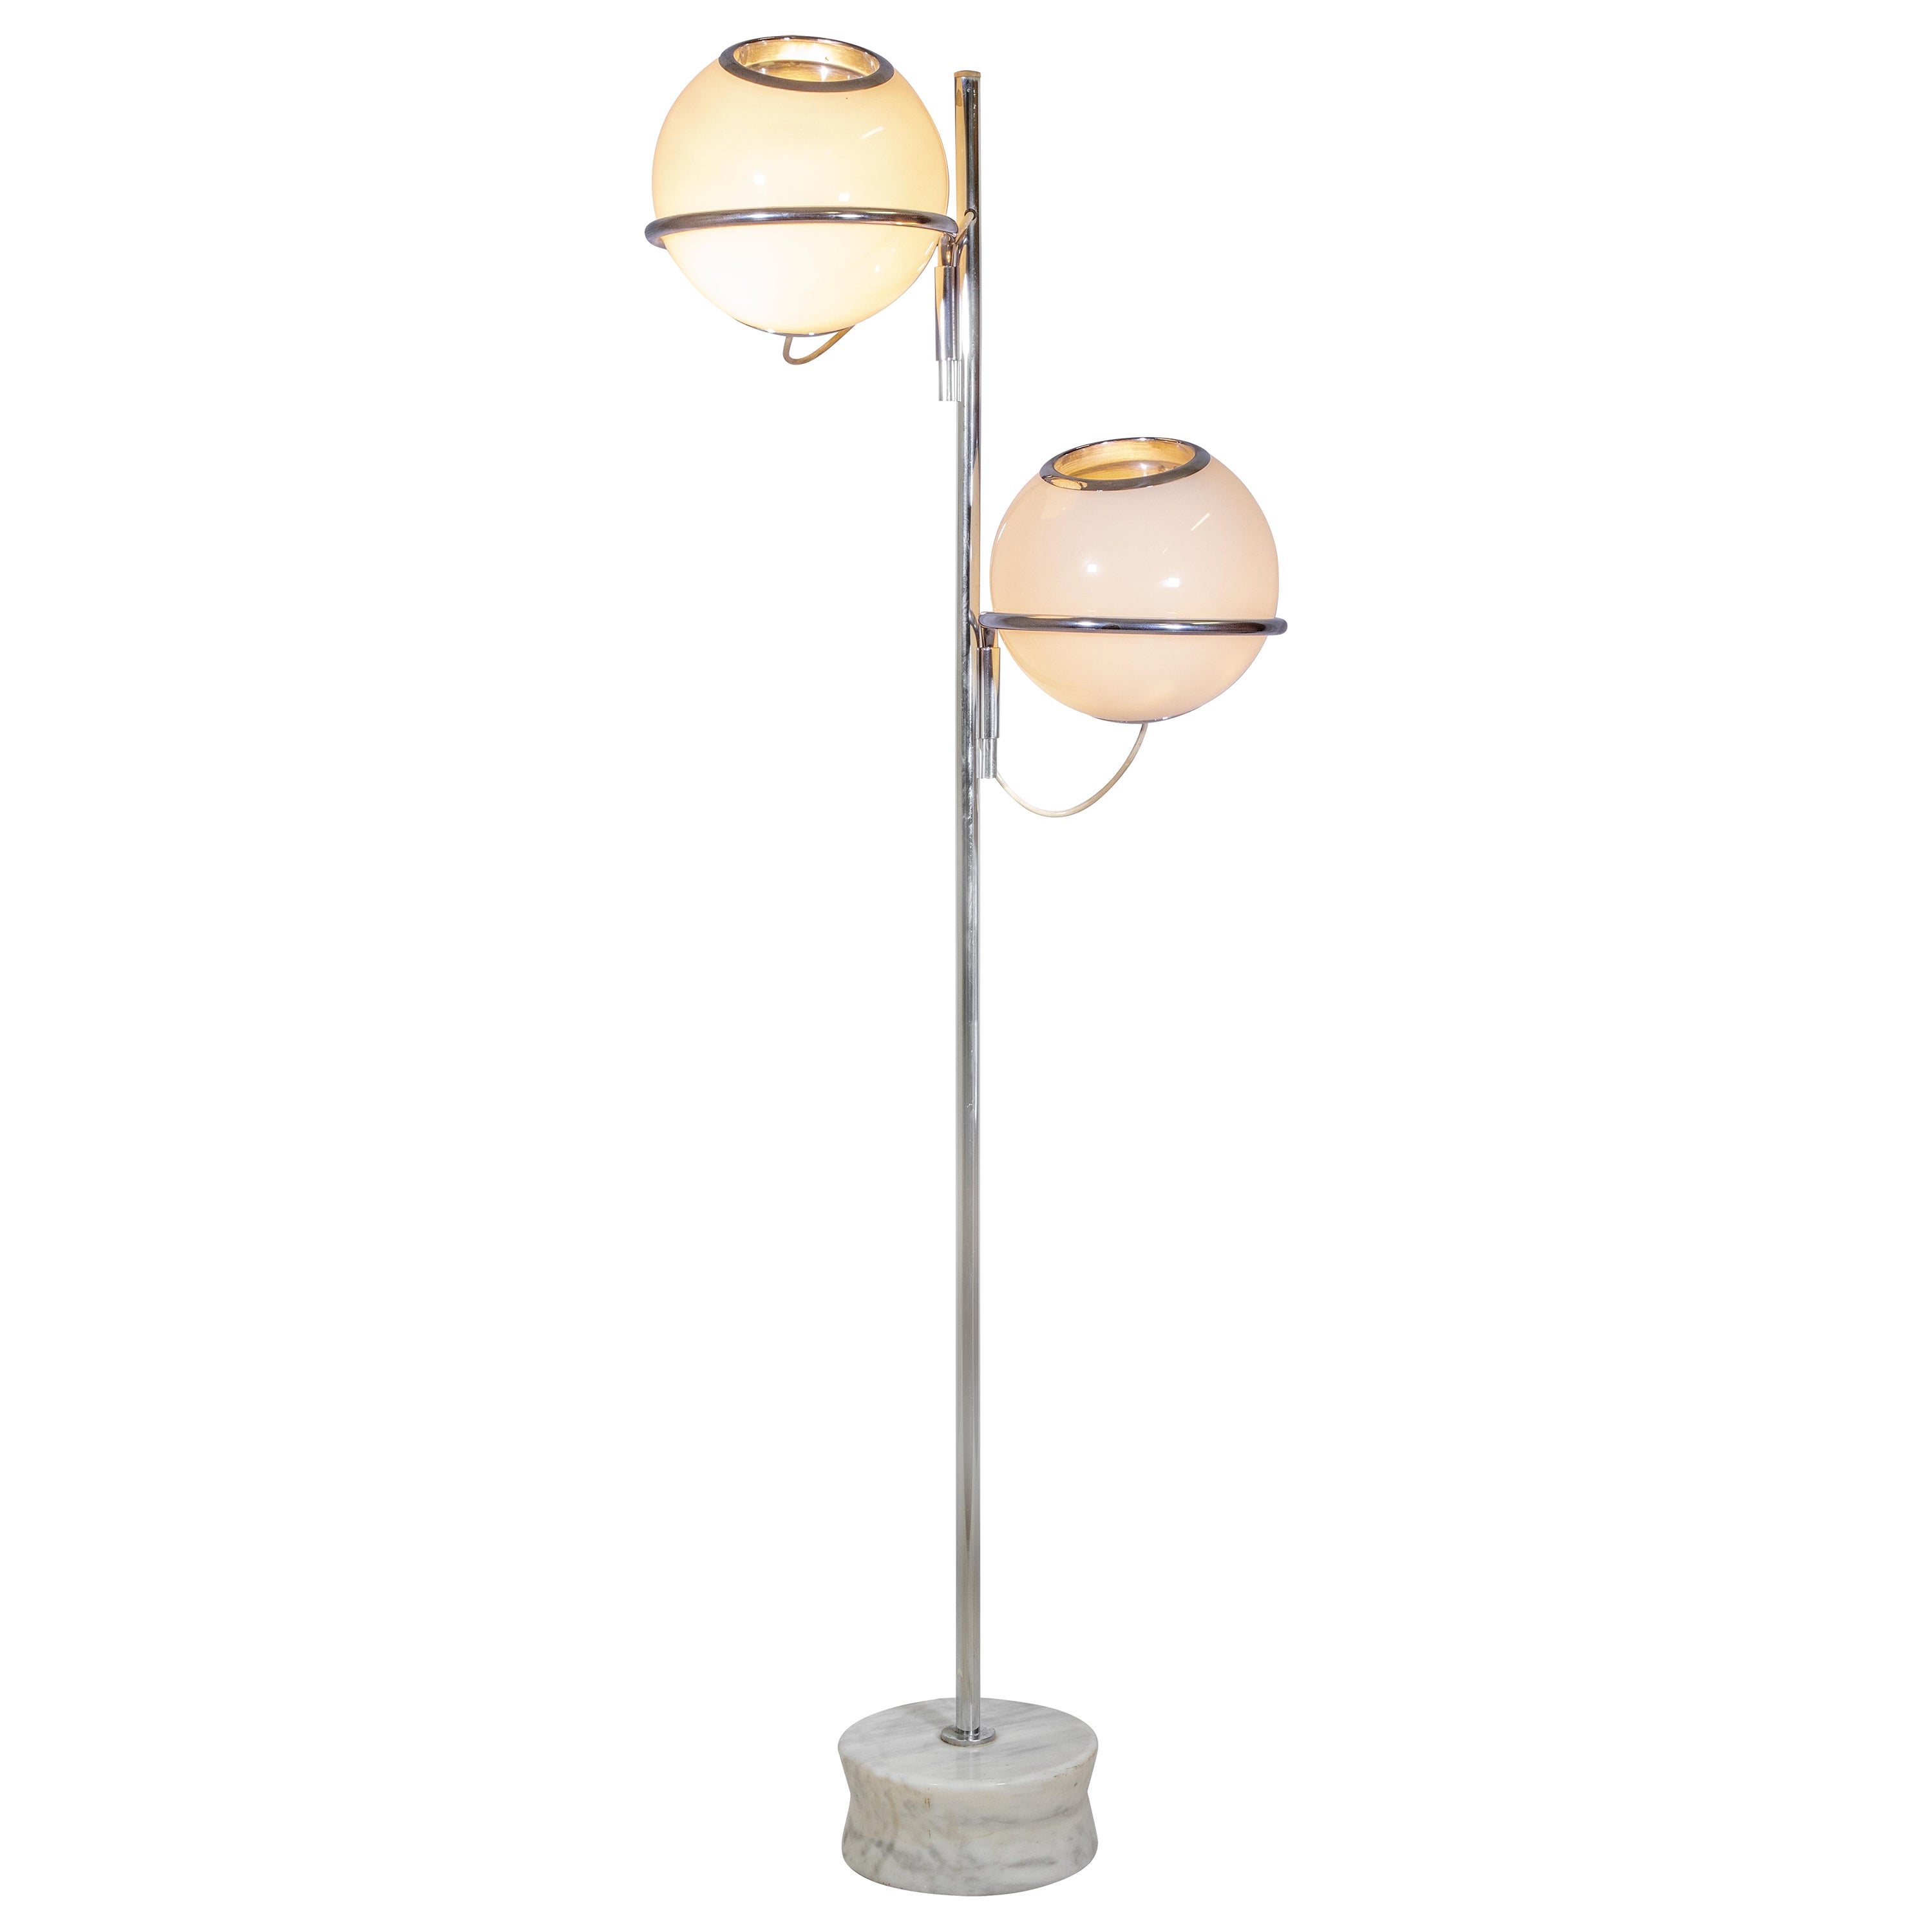 Vintage 1094 Floor Lamp by Gino Sarfatti, Italy, 1969 For Sale